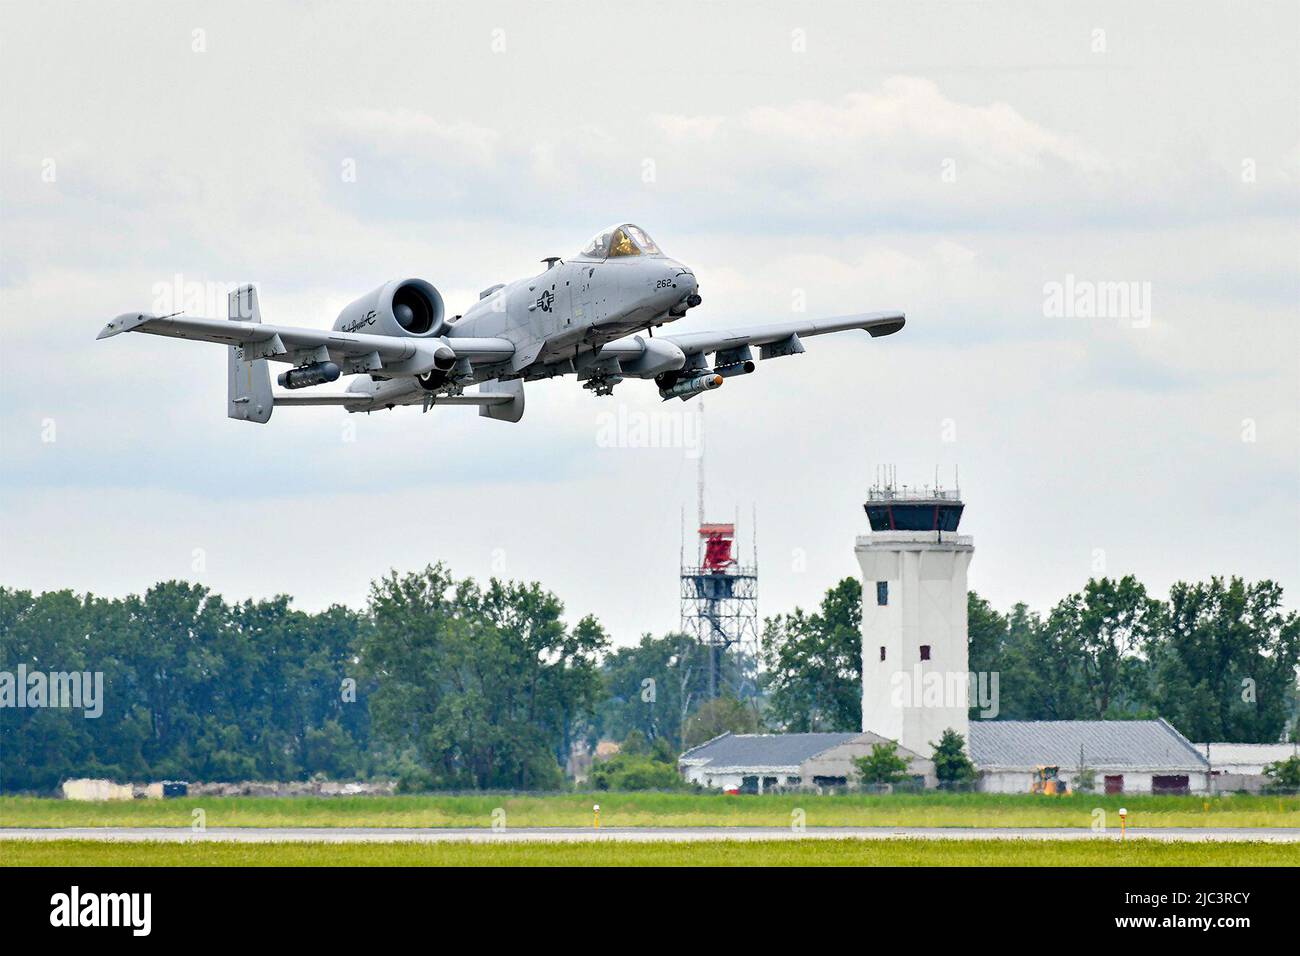 An A-10 Thunderbolt II, flown by the 107th Fighter Squadron, 127th Wing, takes off from Selfridge Air National Guard Base, Mich., June 8, 2022 on a Close Air Support Training Sorti. The A-10 is the Air Force's premier air-to-ground attack aircraft. The 127th Wing is a component of the Michigan Air National Guard. (U.S. Air National Guard Photo By Munnaf H. Joarder) Stock Photo